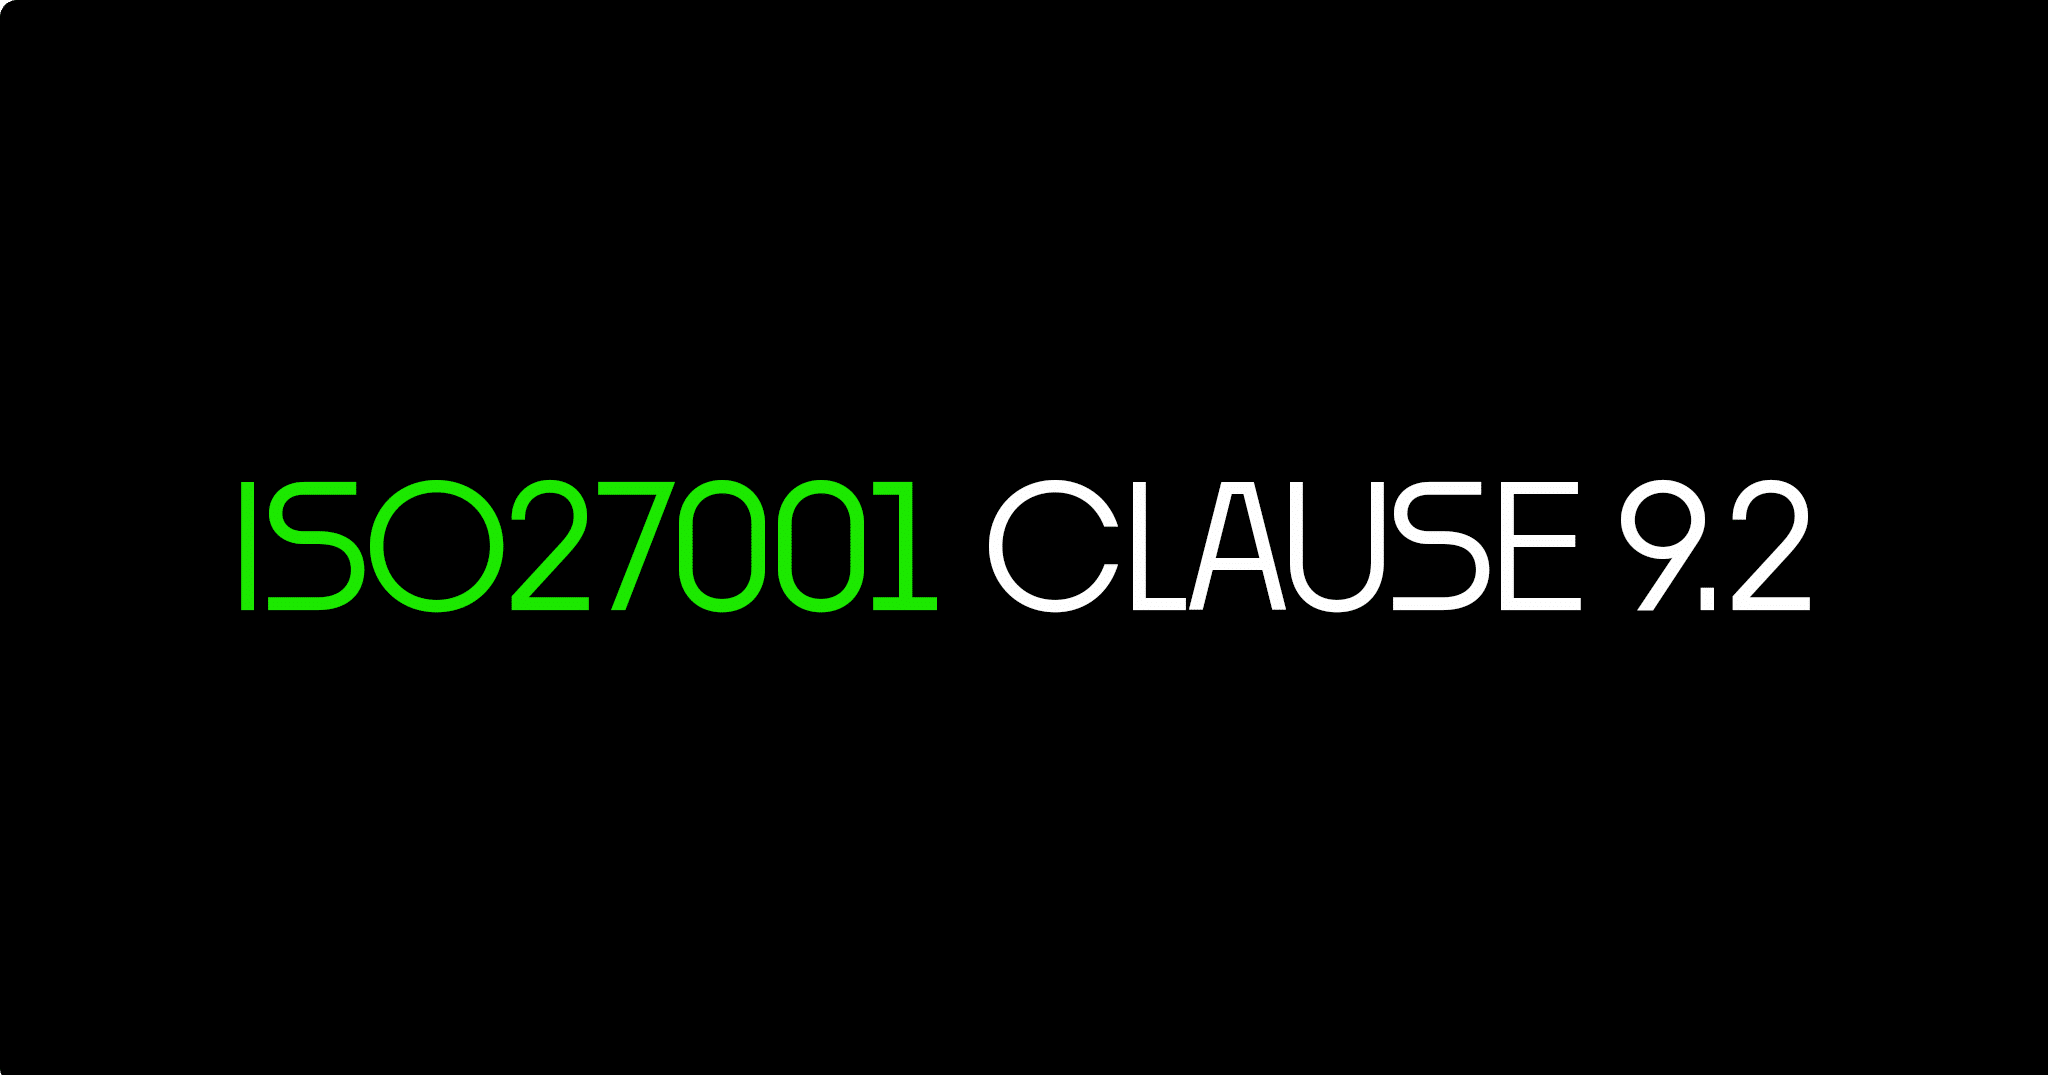 ISO 27001 Clause 9.2 Internal Audit – Ultimate Certification Guide